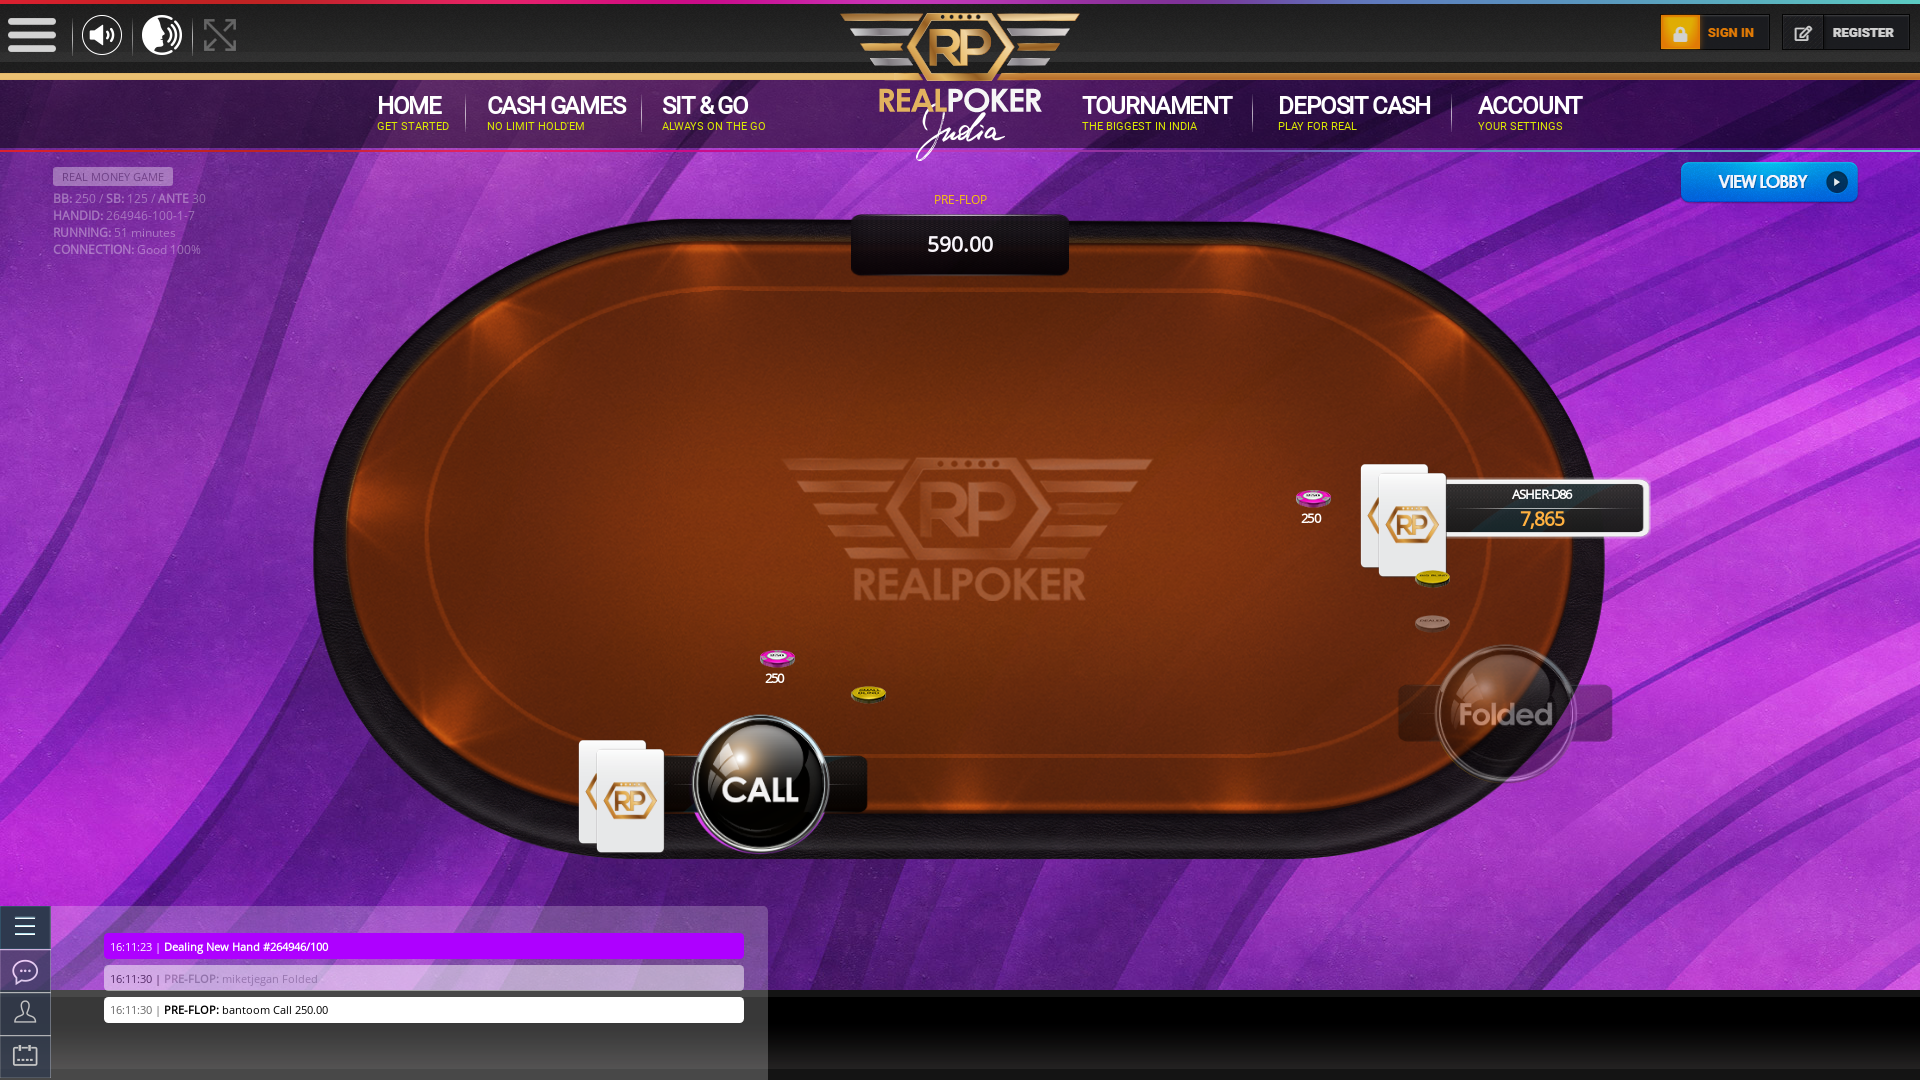 Real poker 10 player table in the 51st minute